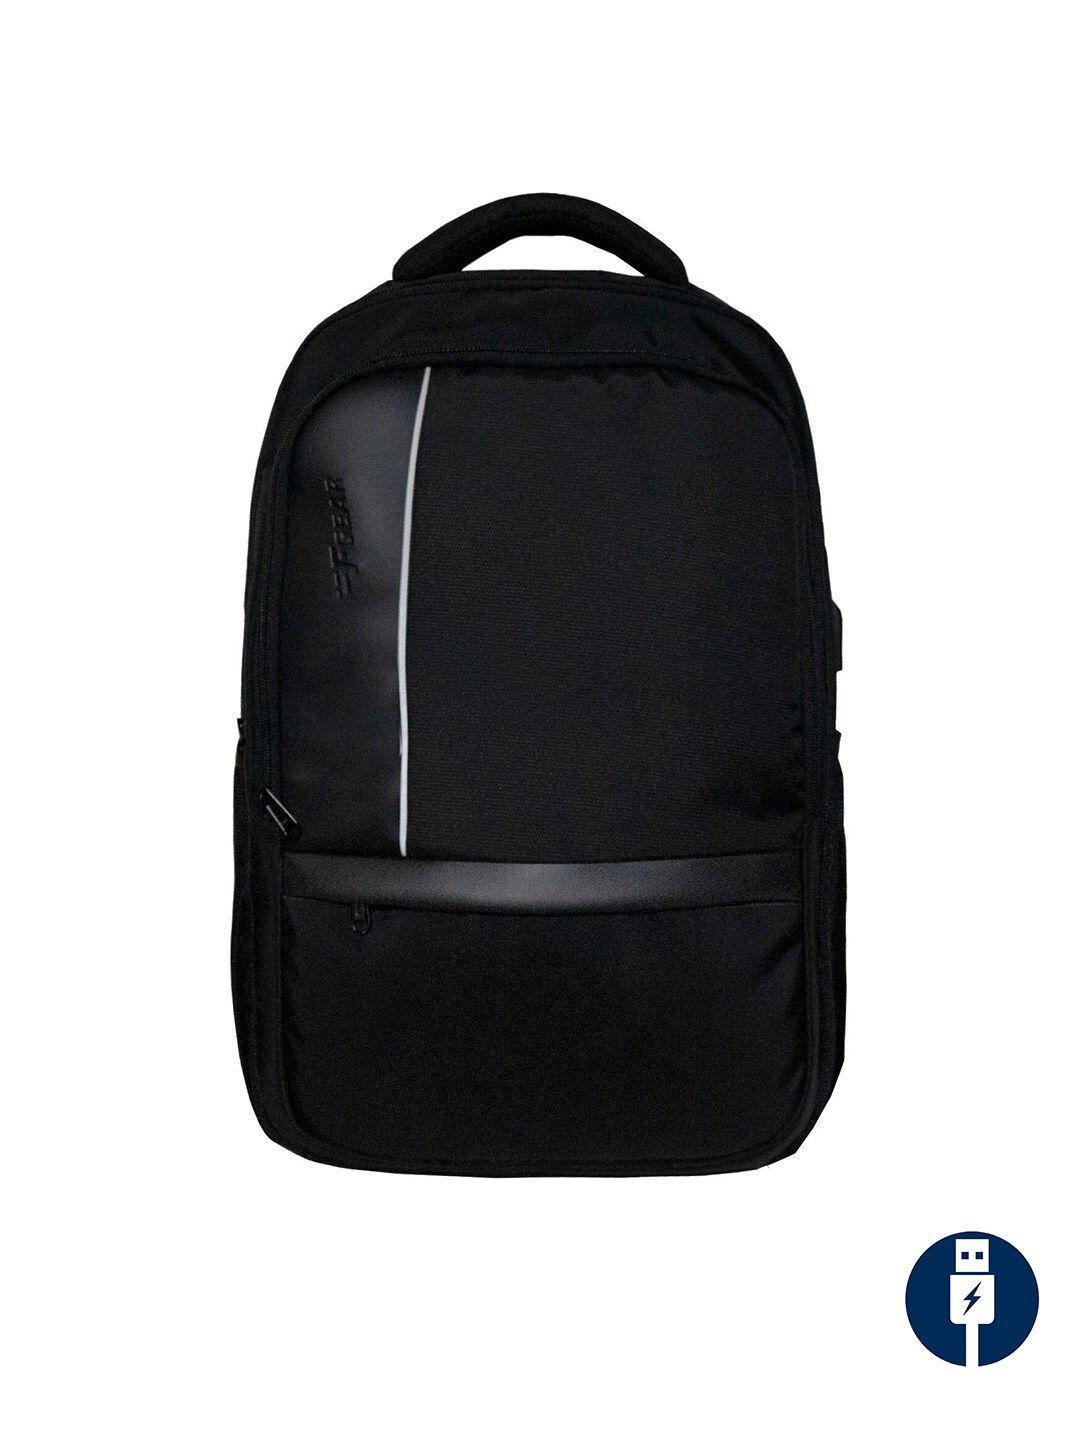 f gear unisex black backpack with usb charging port